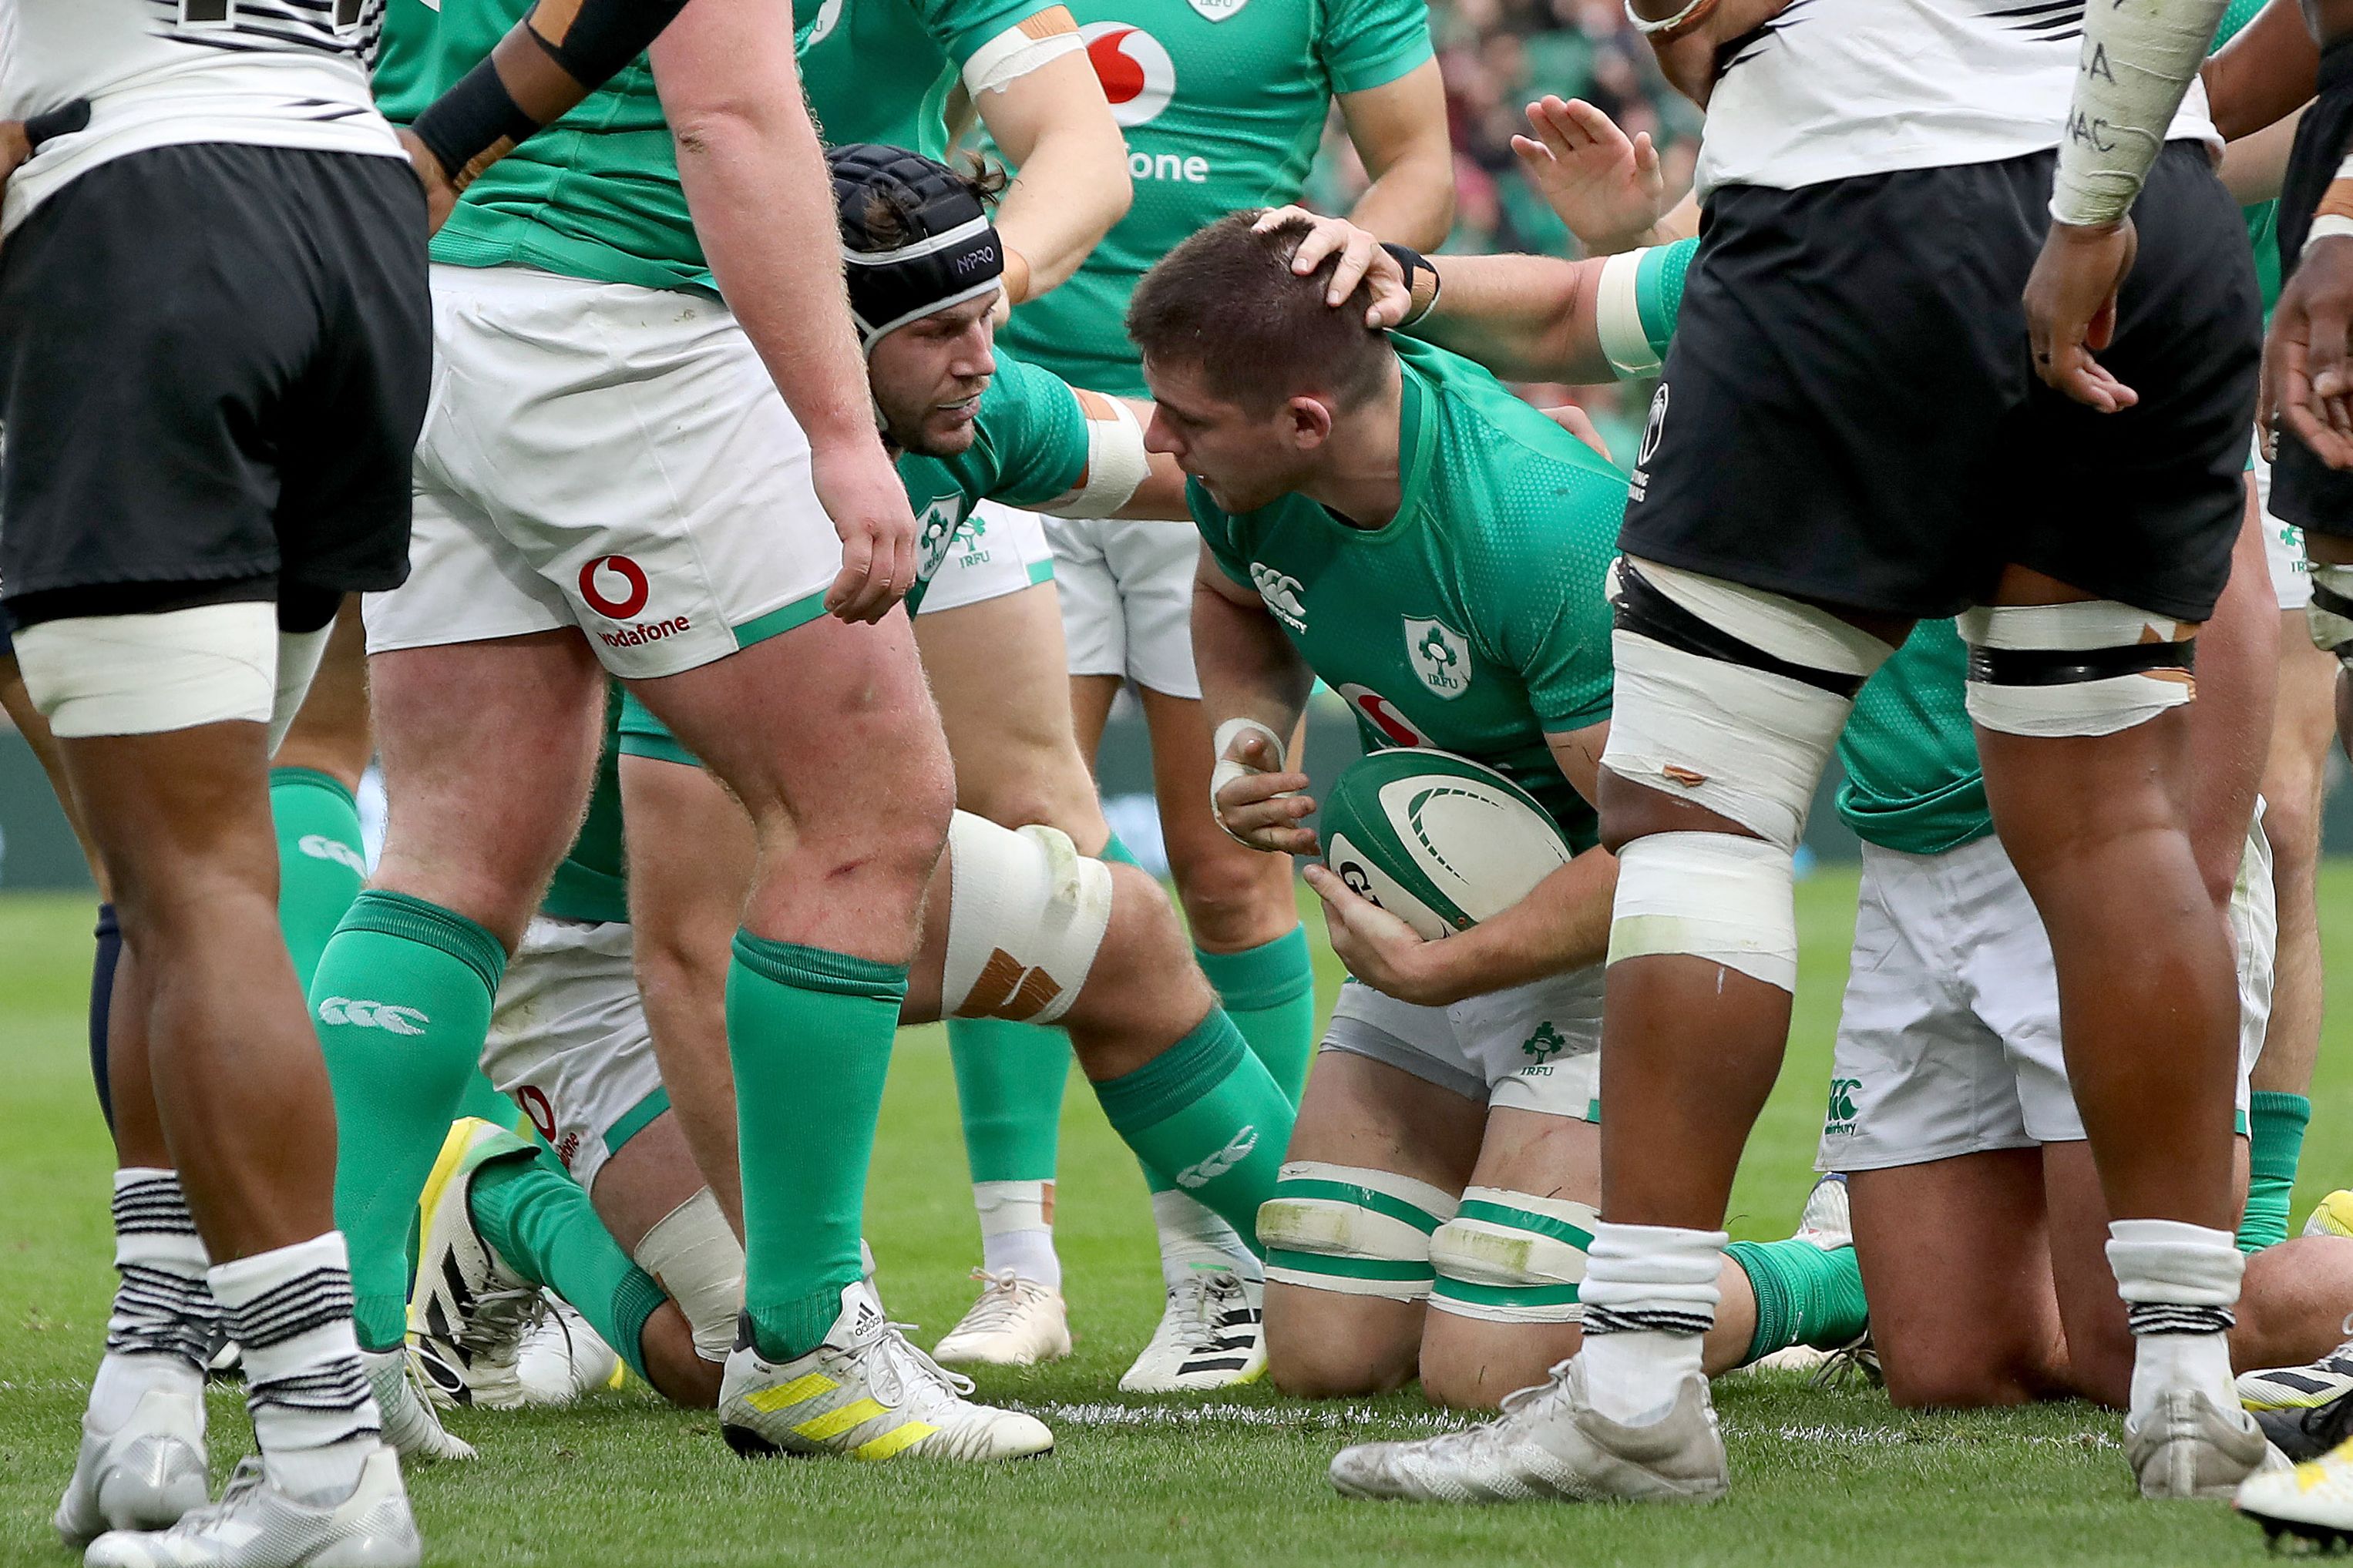 Nick Timoney scored two tries for Ireland